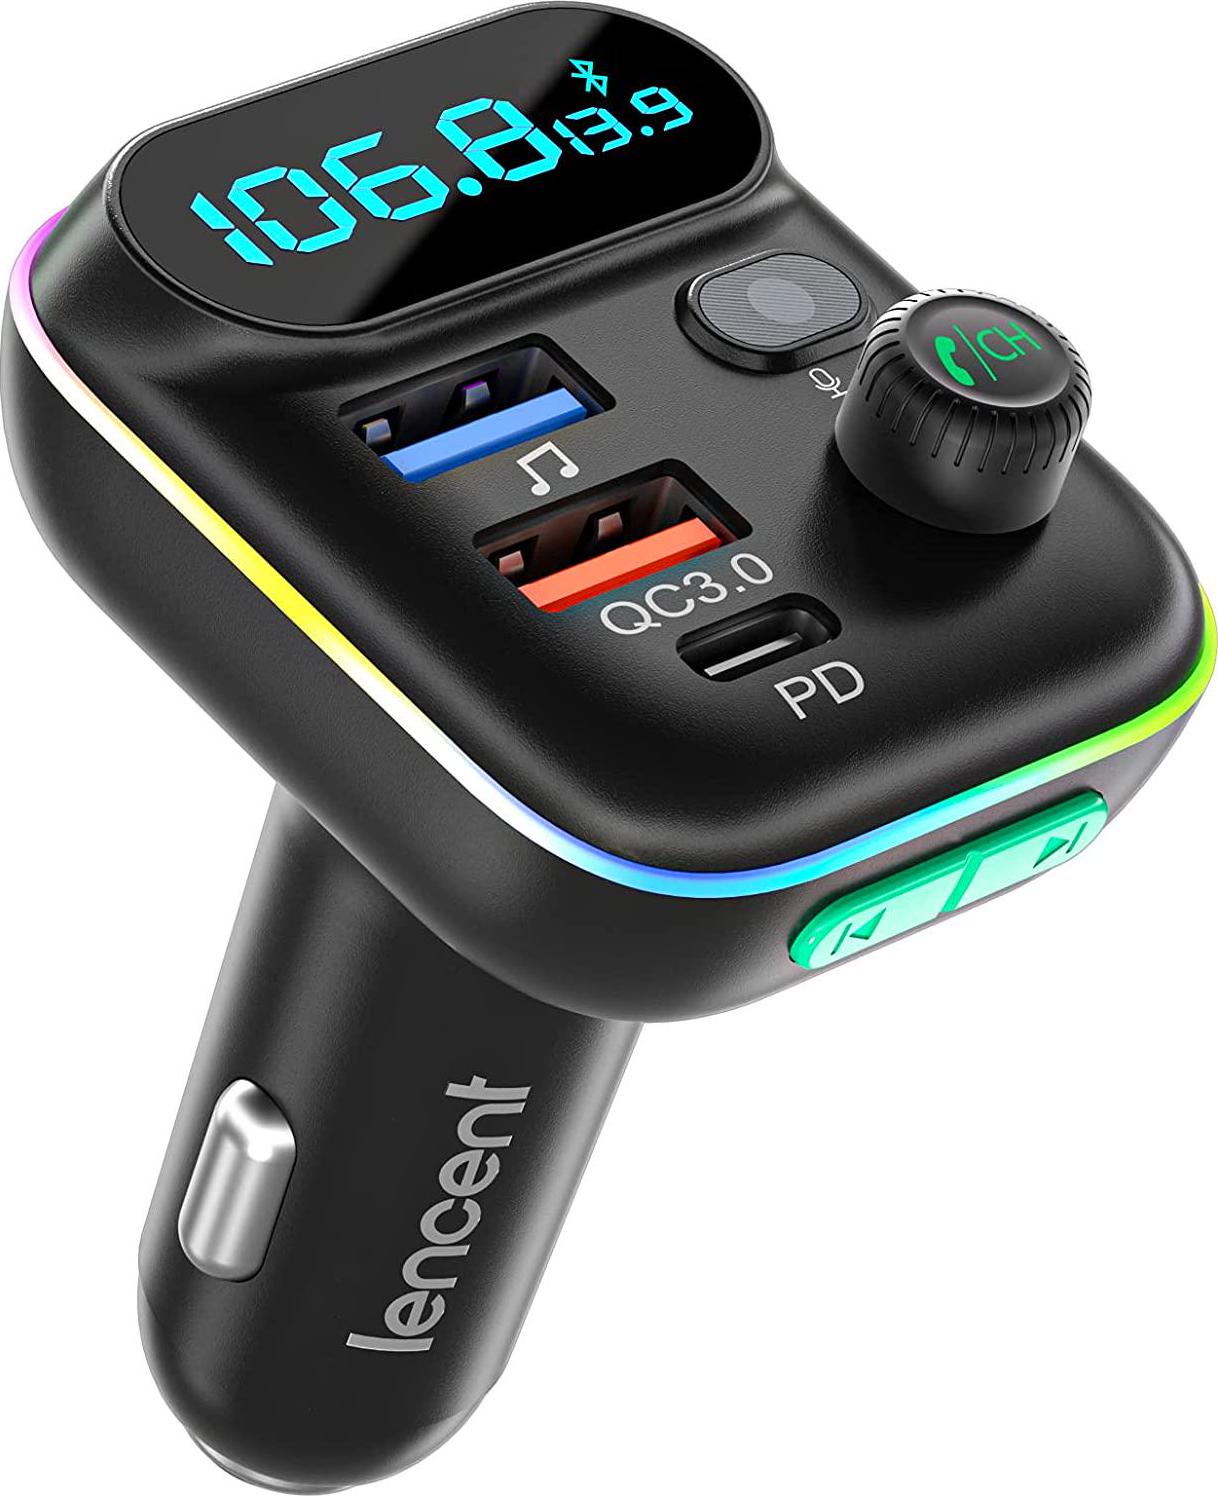 LENCENT, LENCENT FM Transmitter in-Car Adapter, Wireless Bluetooth 5.0 Radio Car Kit,Type-C PD + QC3.0 Fast USB Charger, Hands Free Calling, Mp3 Player Receiver Hi Fi Bass Support U Disk